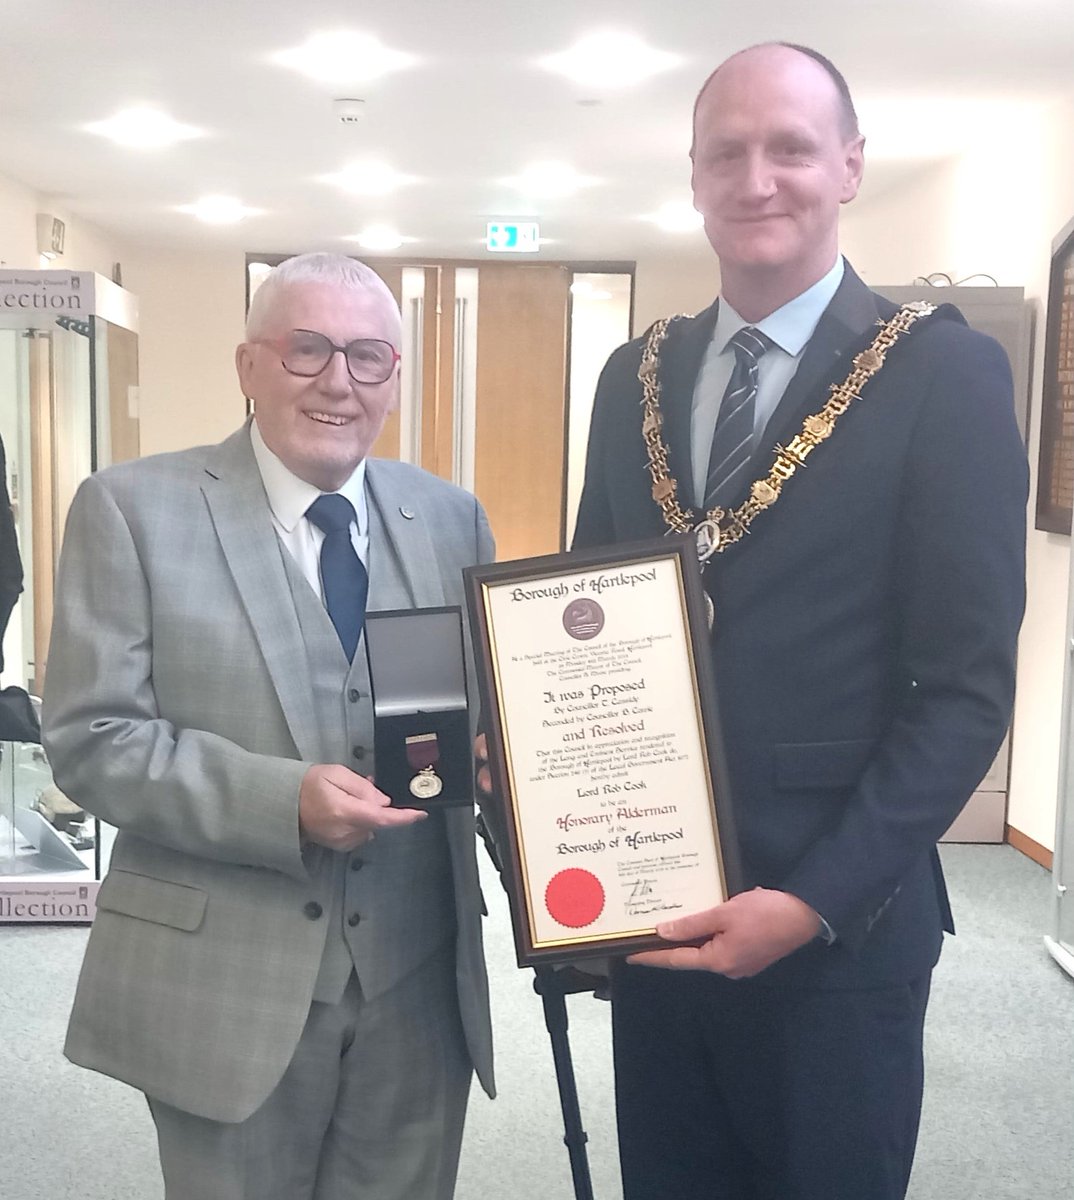 We were delighted to welcome Lord Rob Cook to the Civic Centre to receive his Alderman medal and scroll from Cllr Shane Moore, Ceremonial Mayor of Hartlepool. As a former councillor, the honour reflects his significant and sustained contribution to the Borough of Hartlepool.